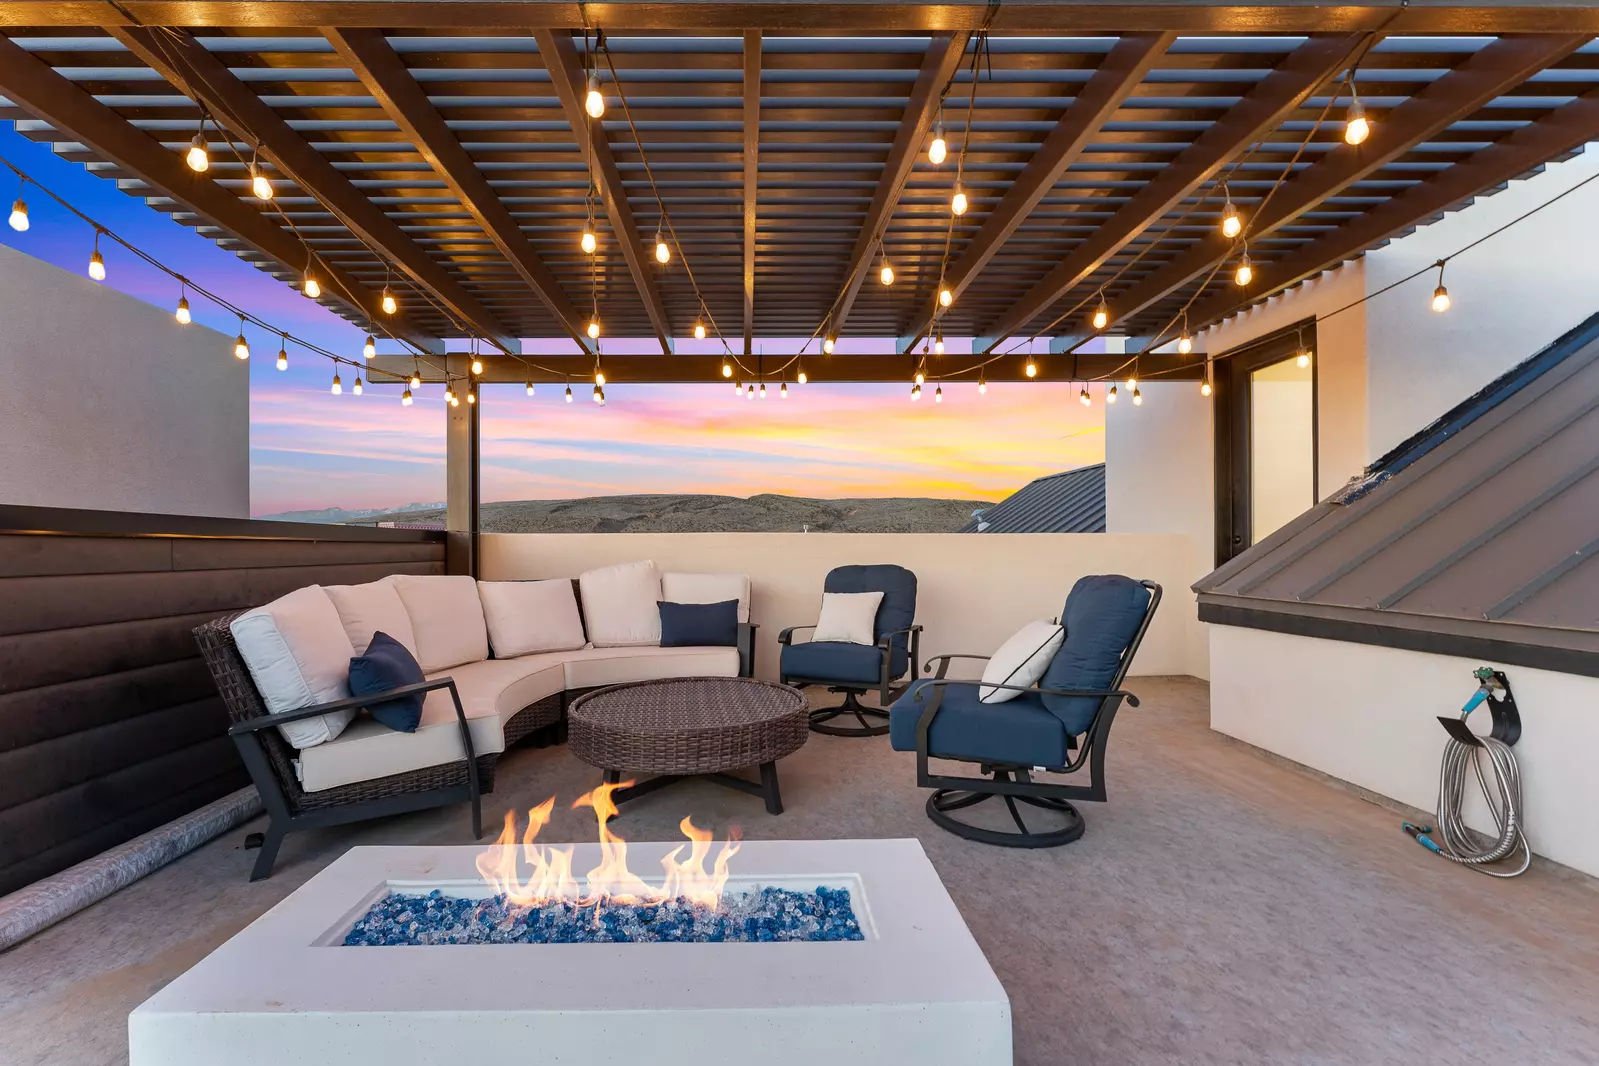 Firepit and Outdoor Seating